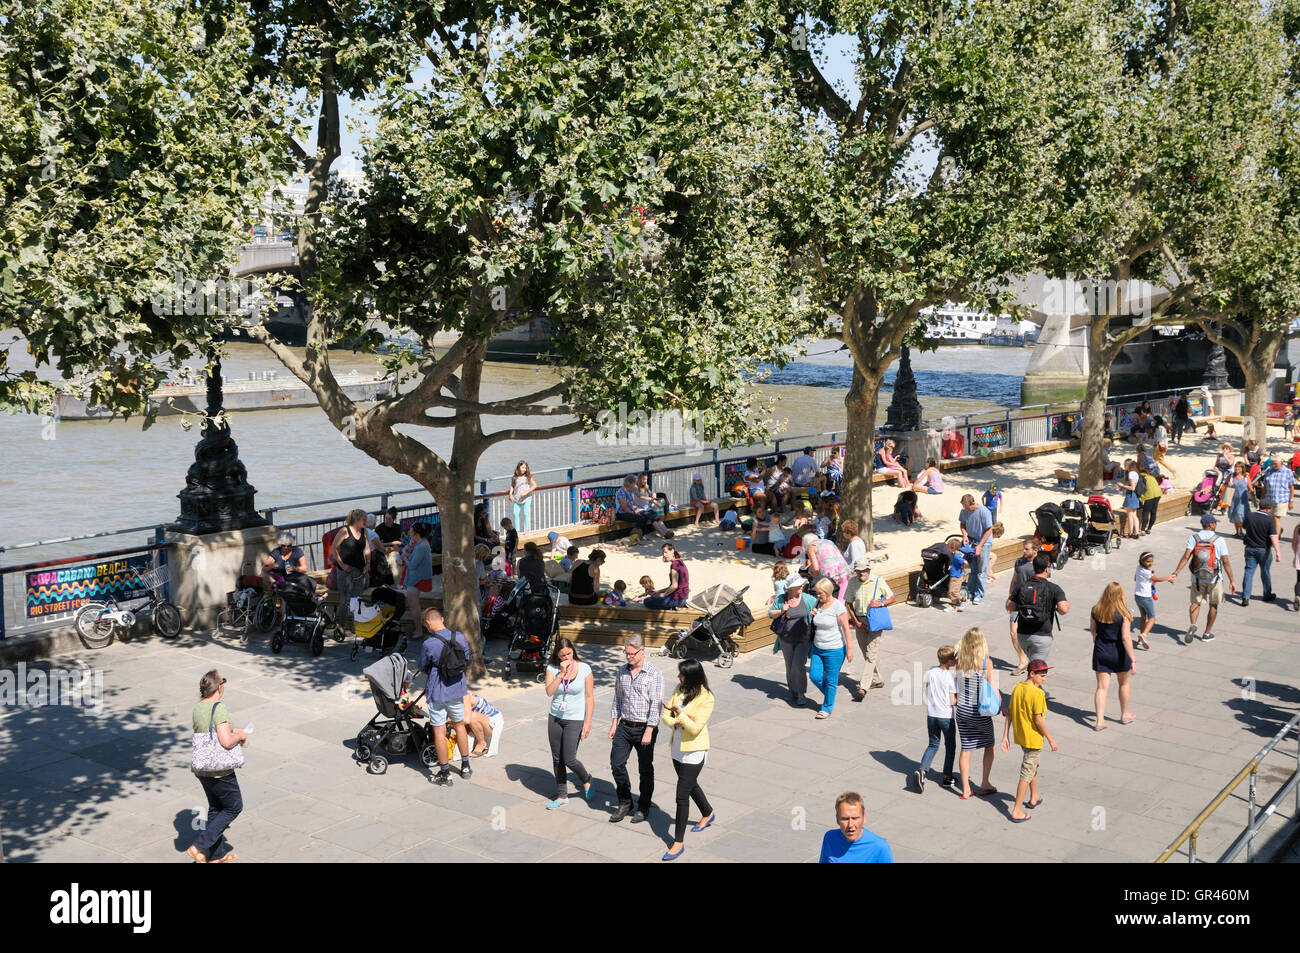 London's South Bank in summer.  People strolling along the Thames Path next to the temporary beaches set up by the River Thames. Stock Photo